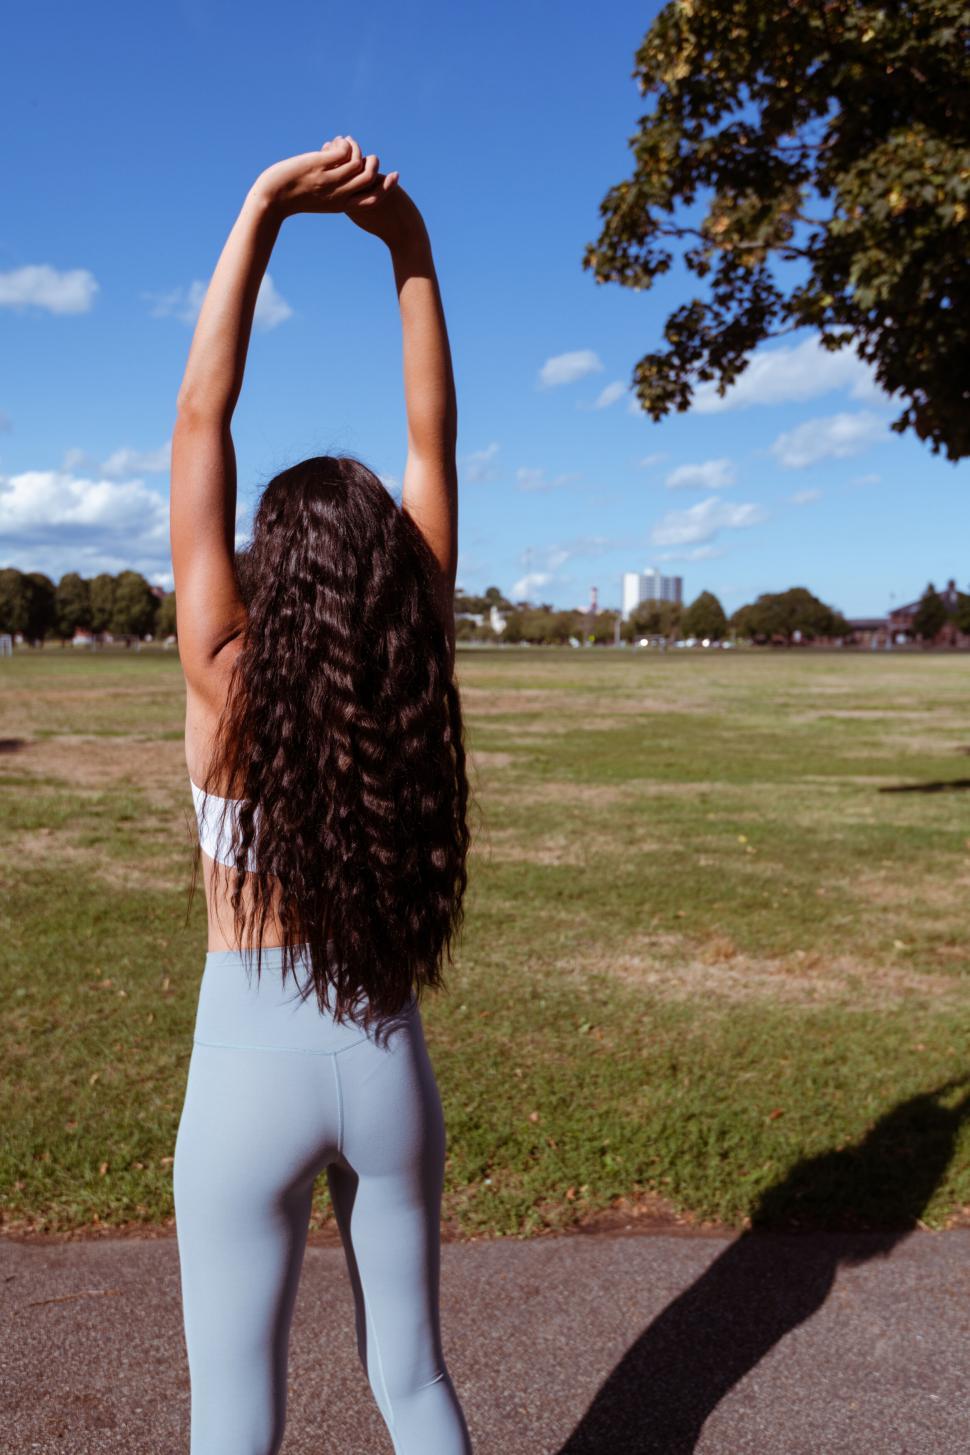 Free Image of Woman stretching exercising in a park 